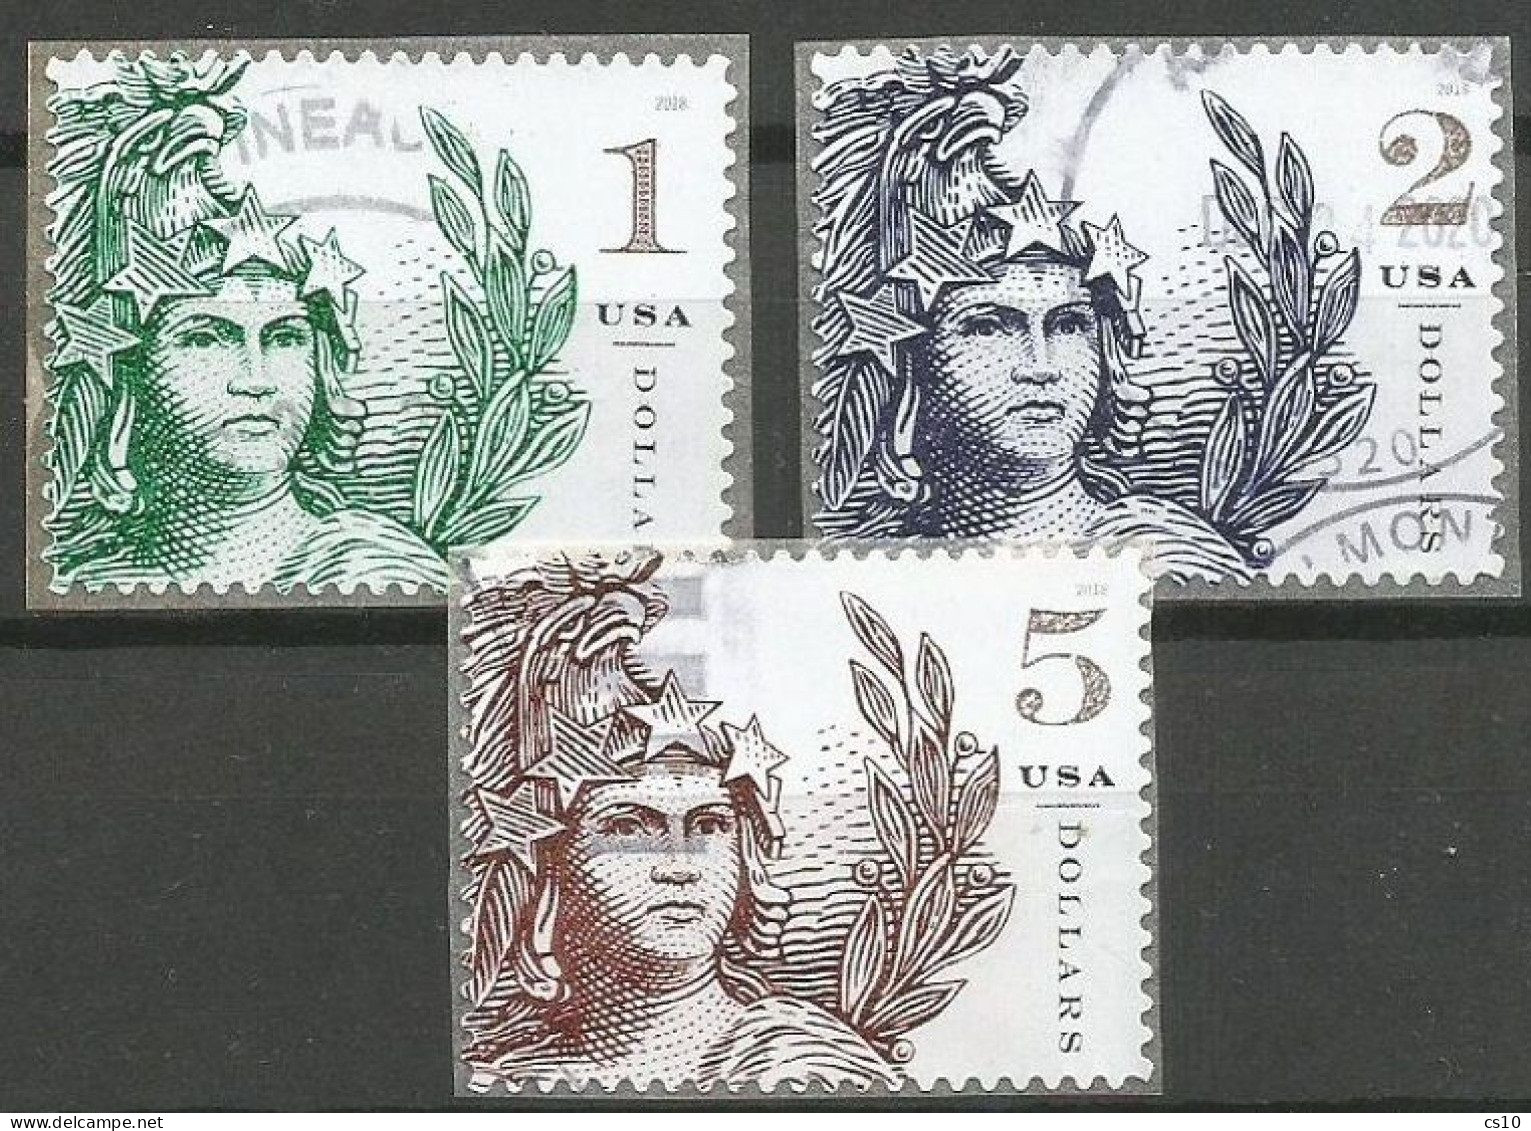 USA 2018 Statue Of Liberty - Freedom High Values $ 1-2-5 SC.# 5295/97 - Cpl 3v Set In VFU Condition - Colecciones & Lotes